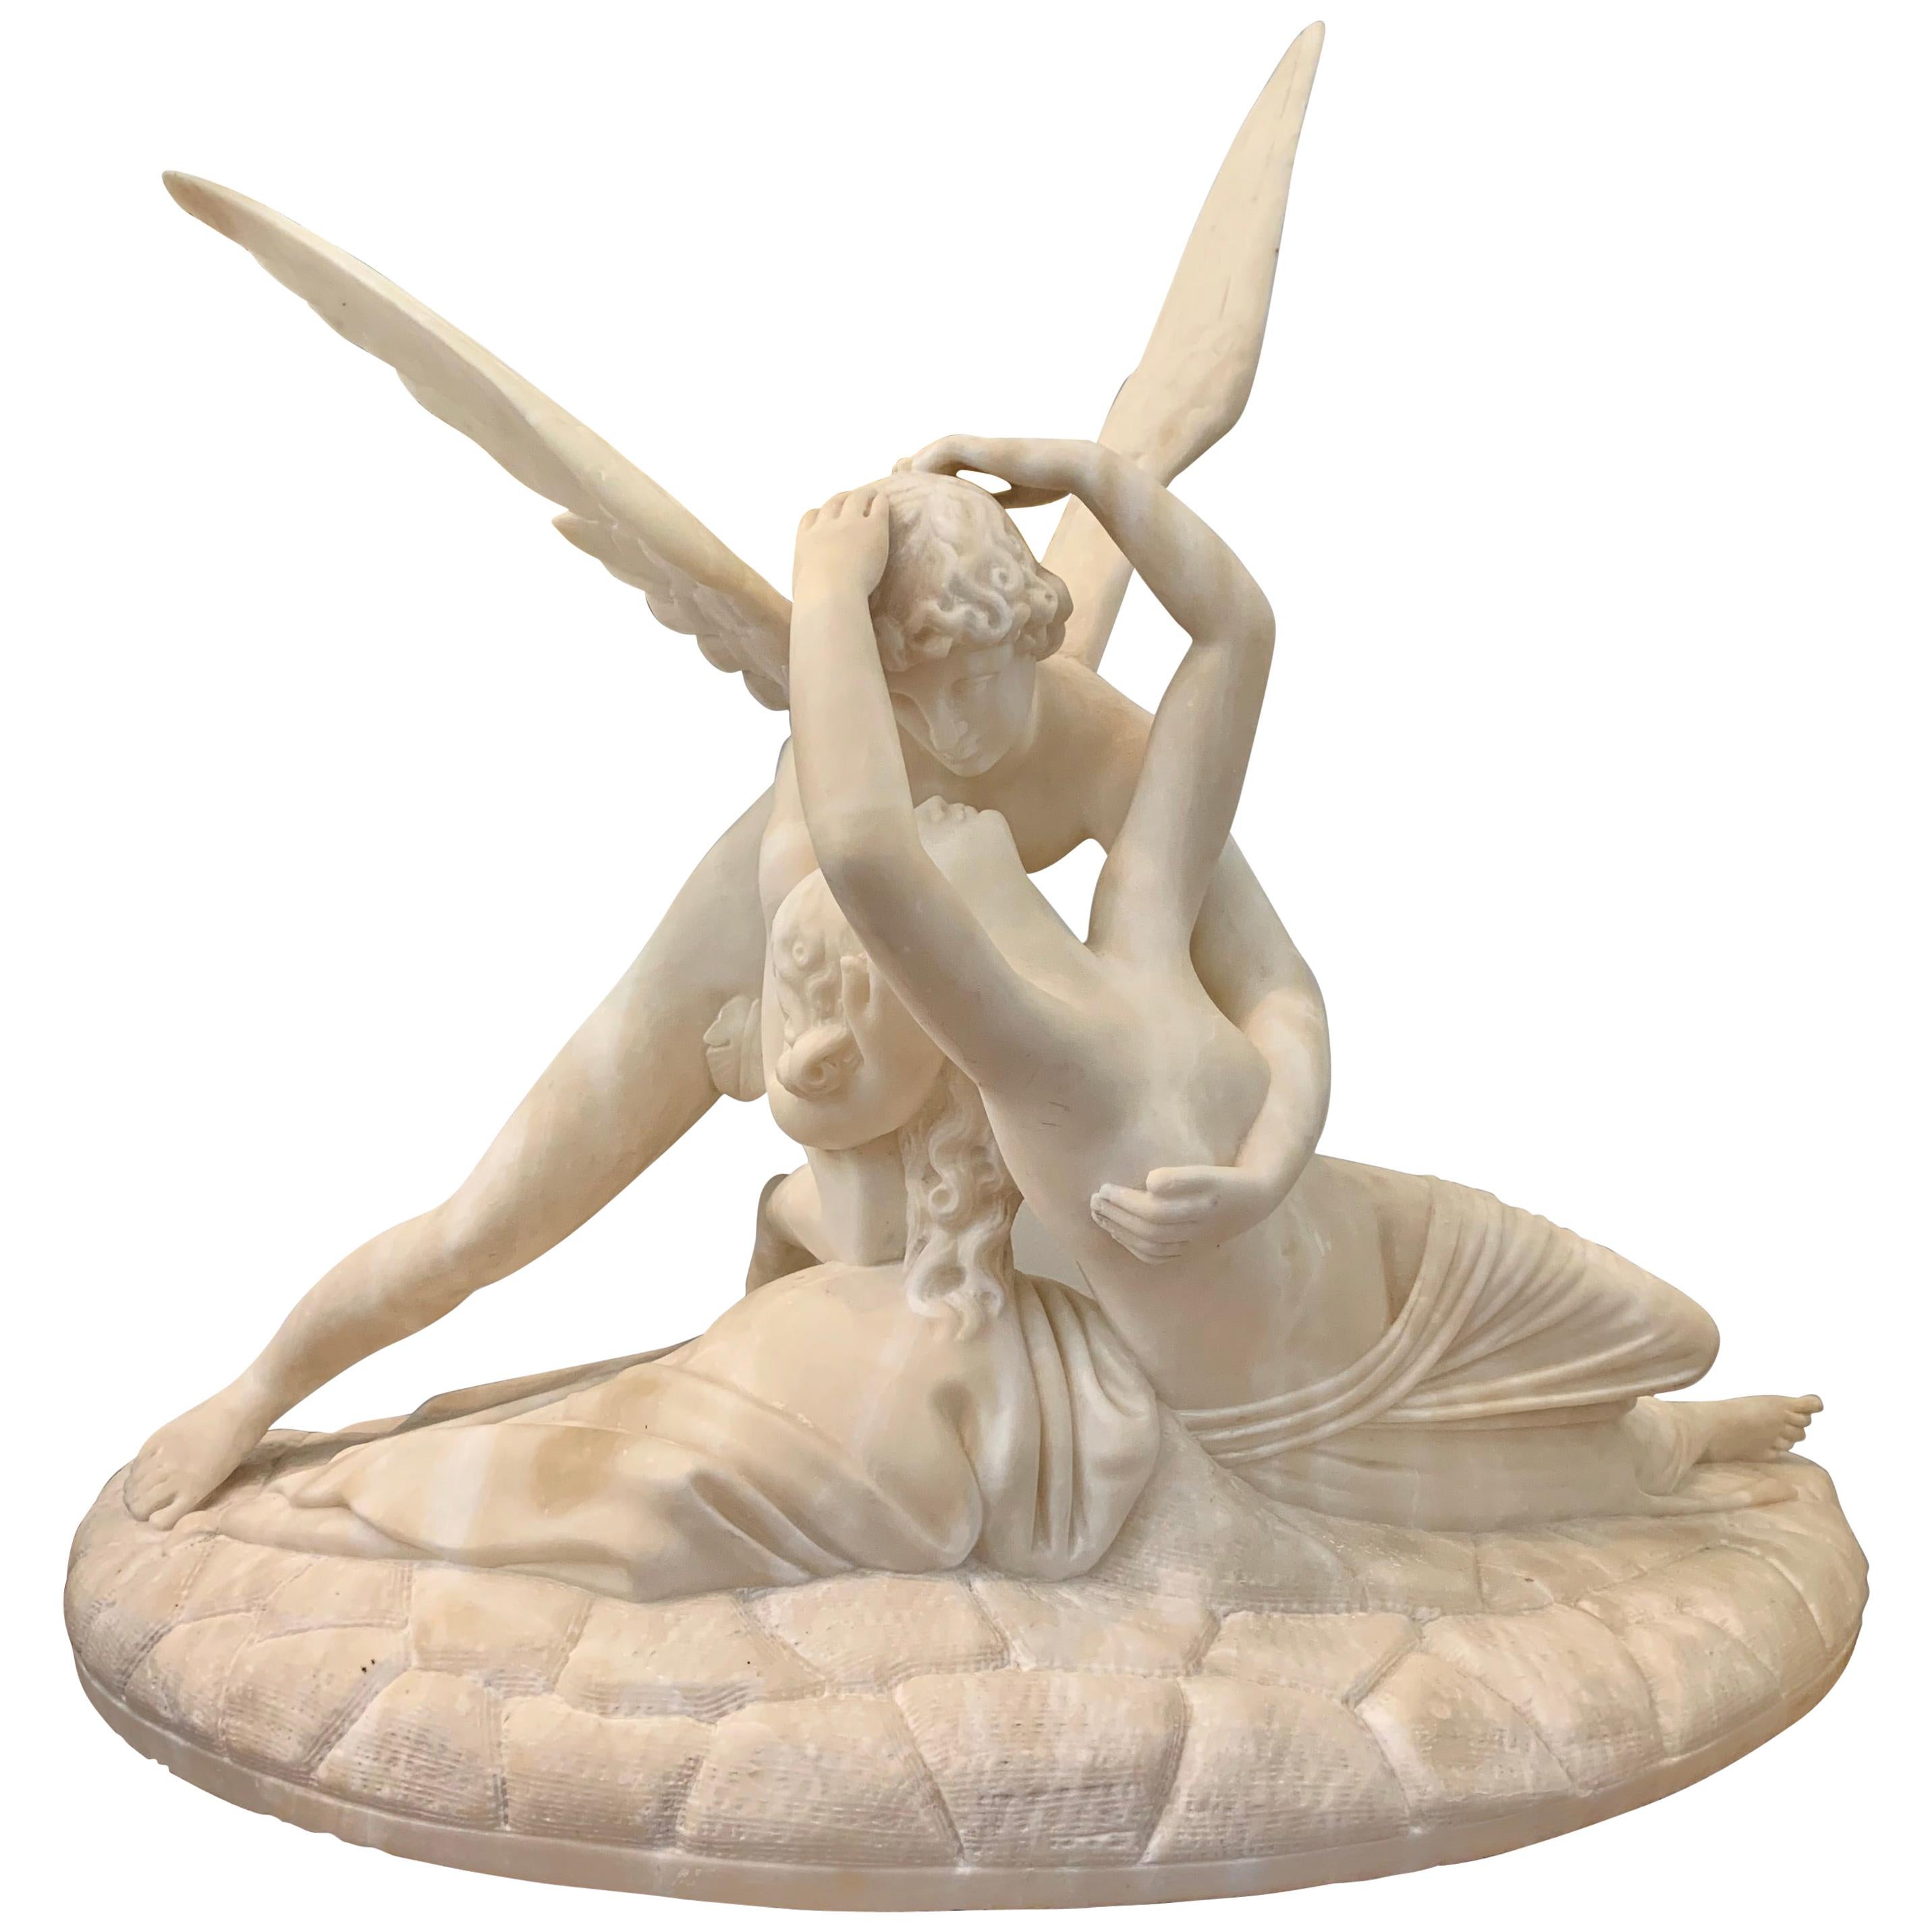 19th Century Carved Alabaster Sculpture of Cupid and Psyche